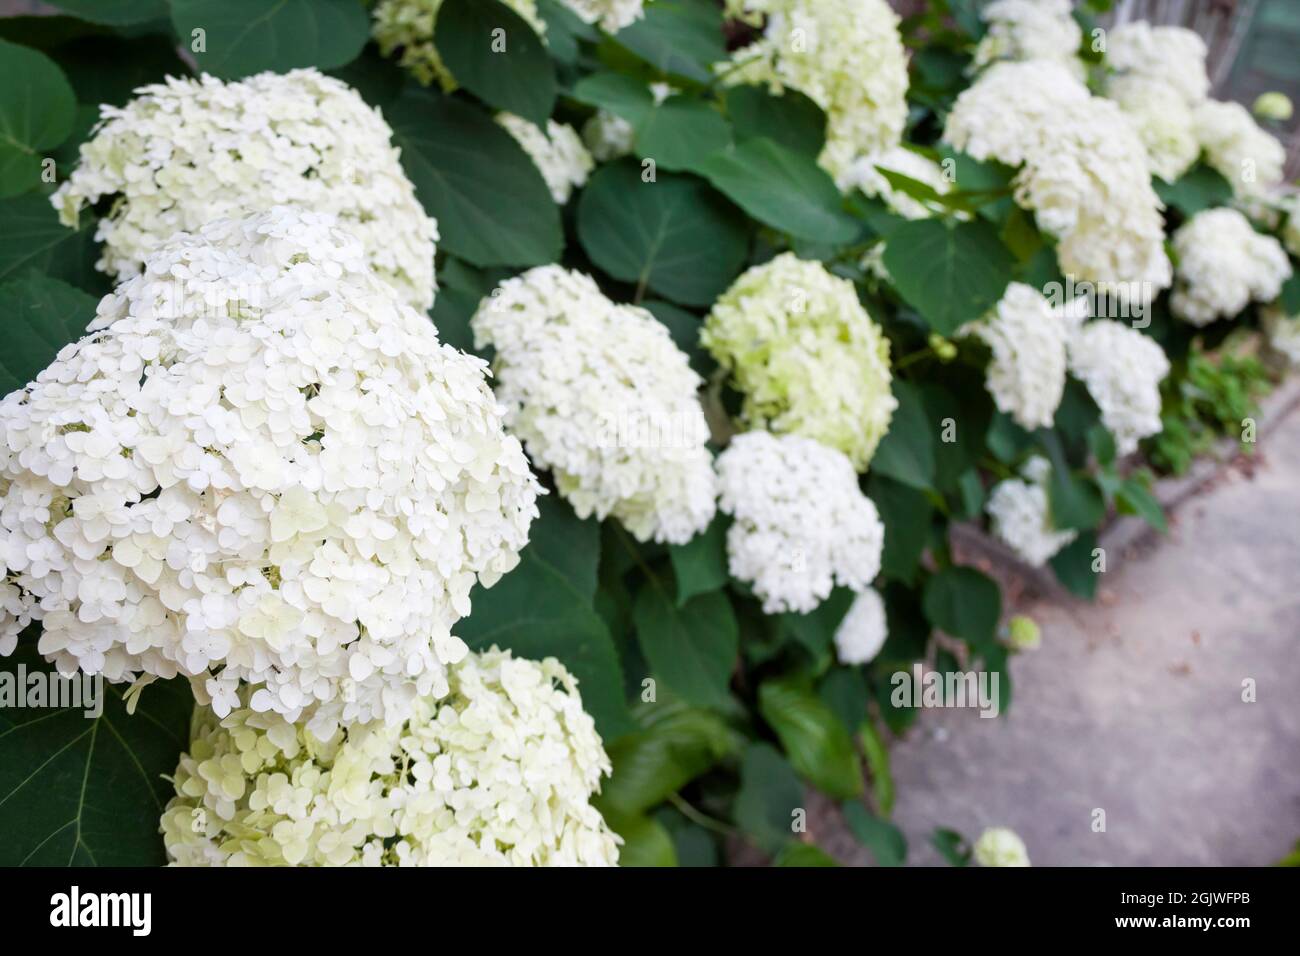 Blooming white Annabelle Hydrangea arborescens (commonly known as smooth hydrangea, wild hydrangea, or sevenbark) Stock Photo